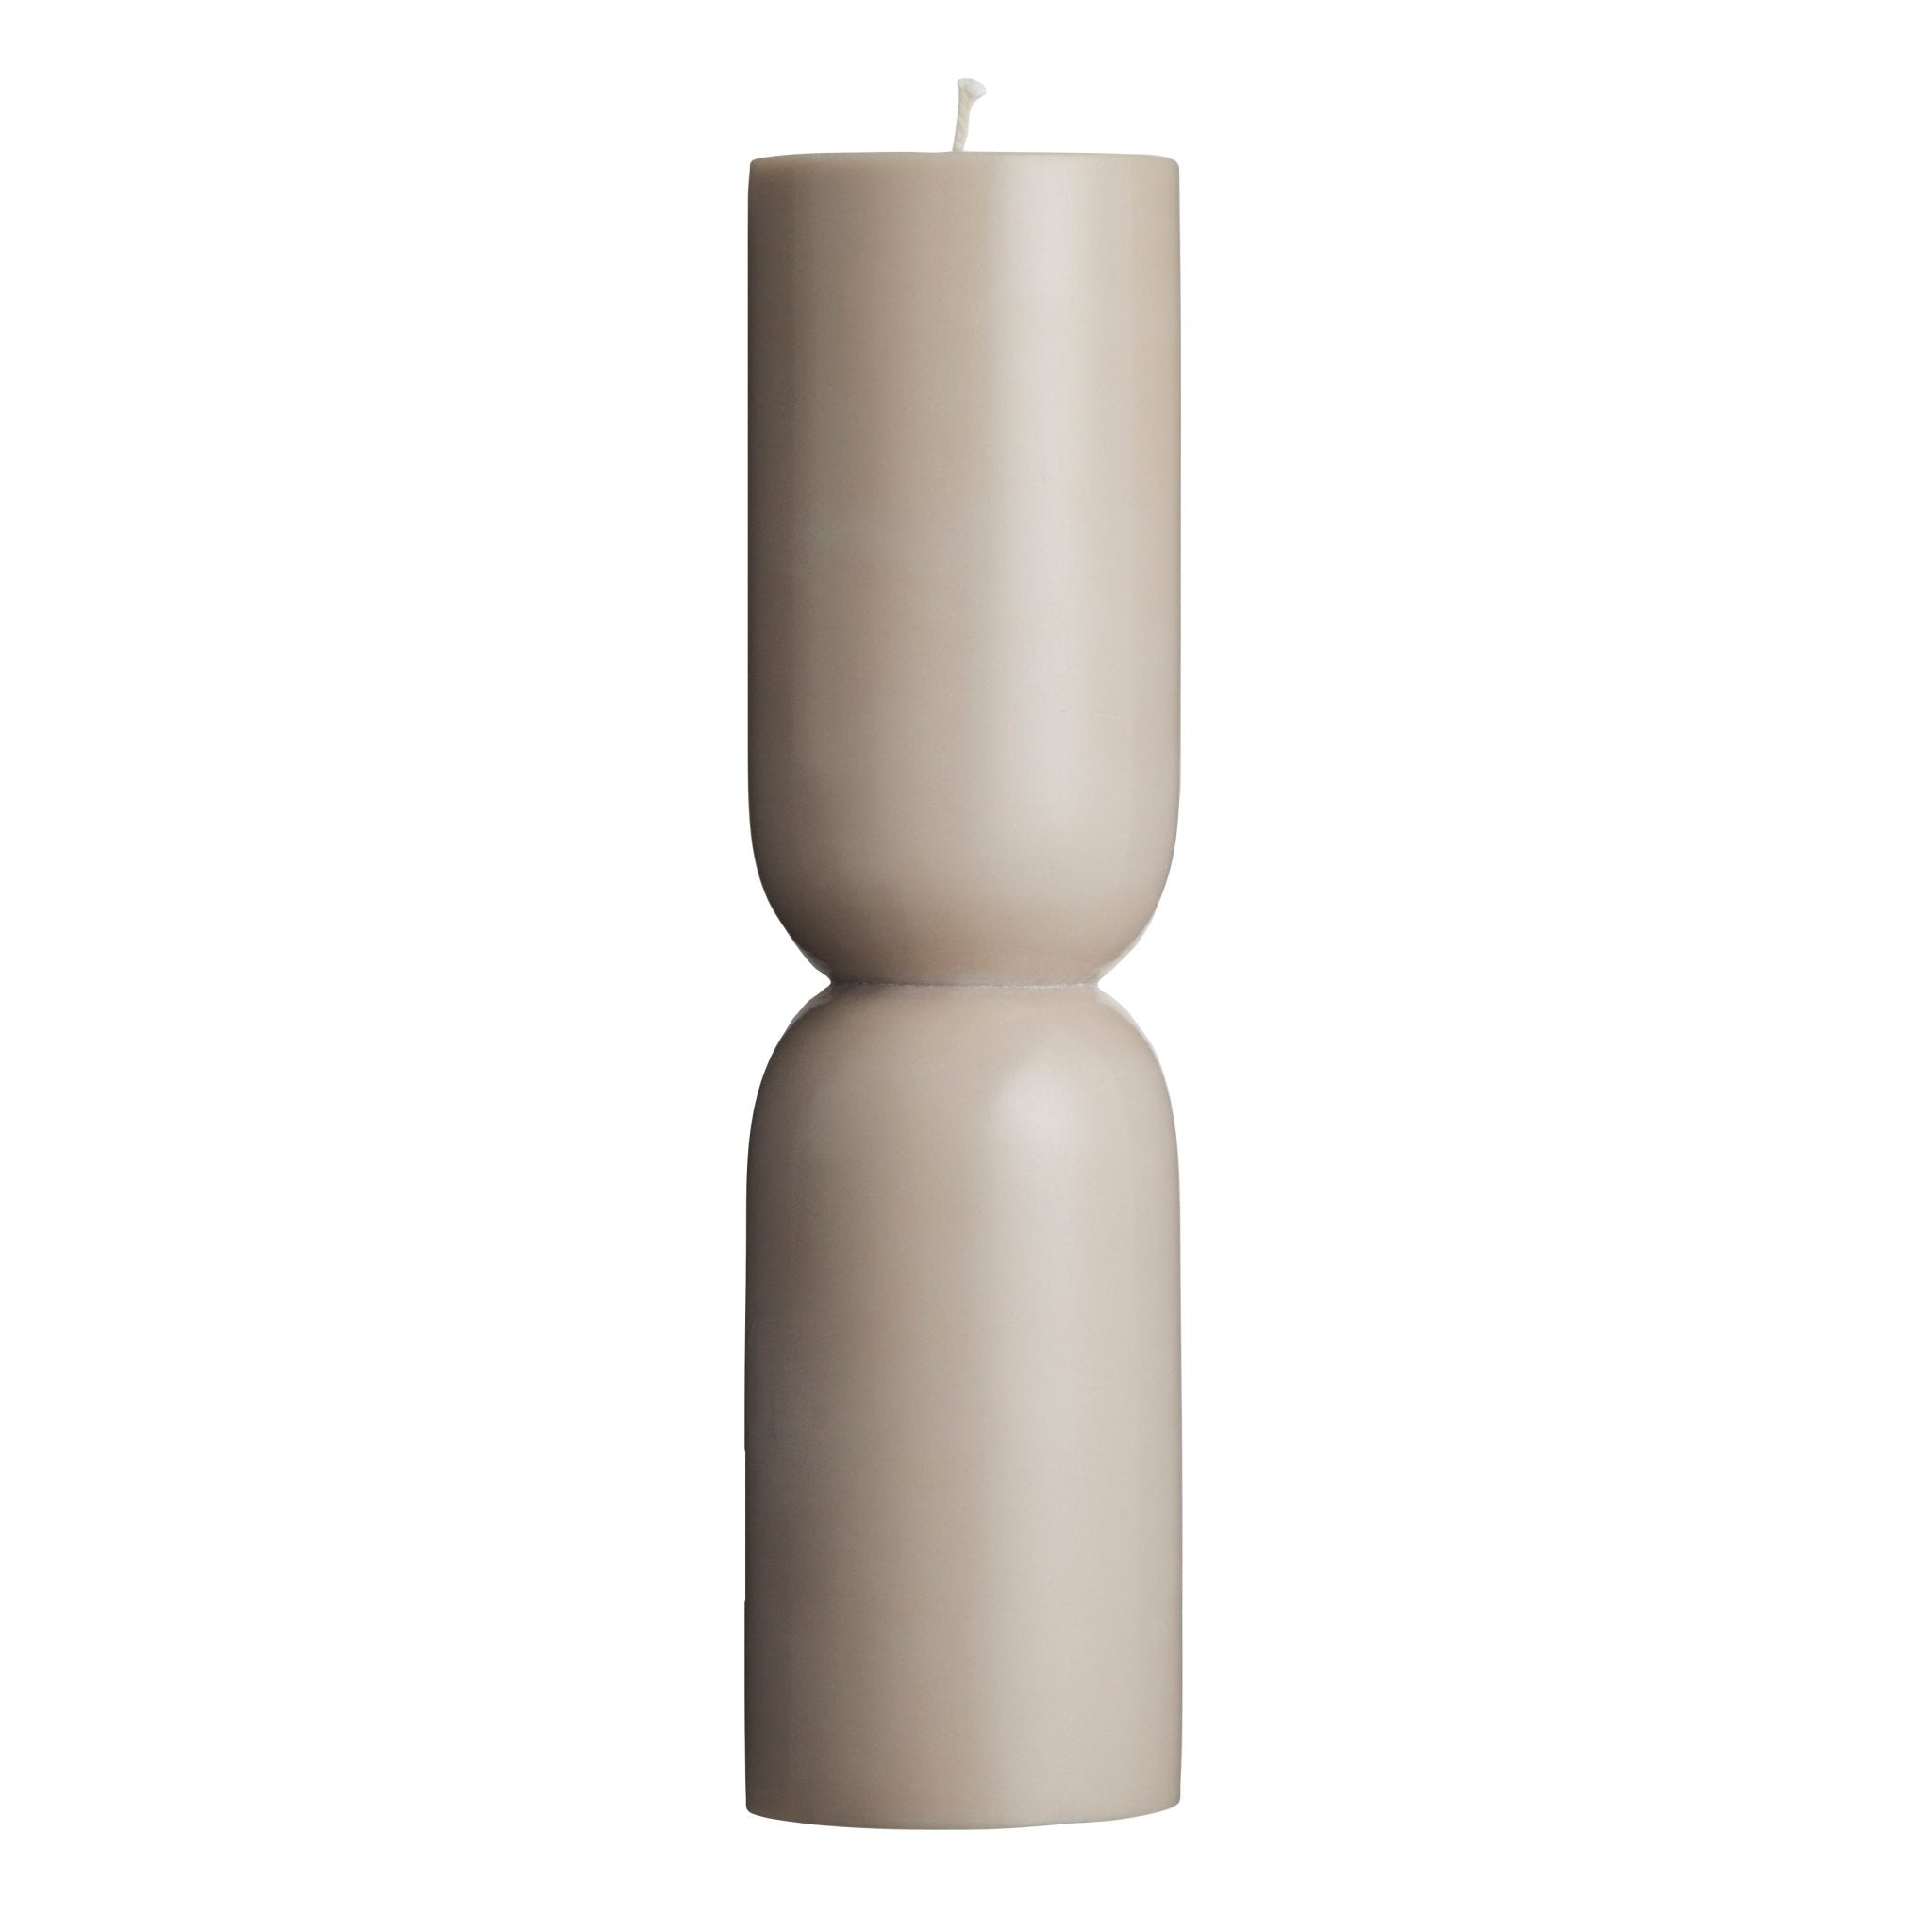 Pillar candle Organic L, Clay, Originalhome - By Native